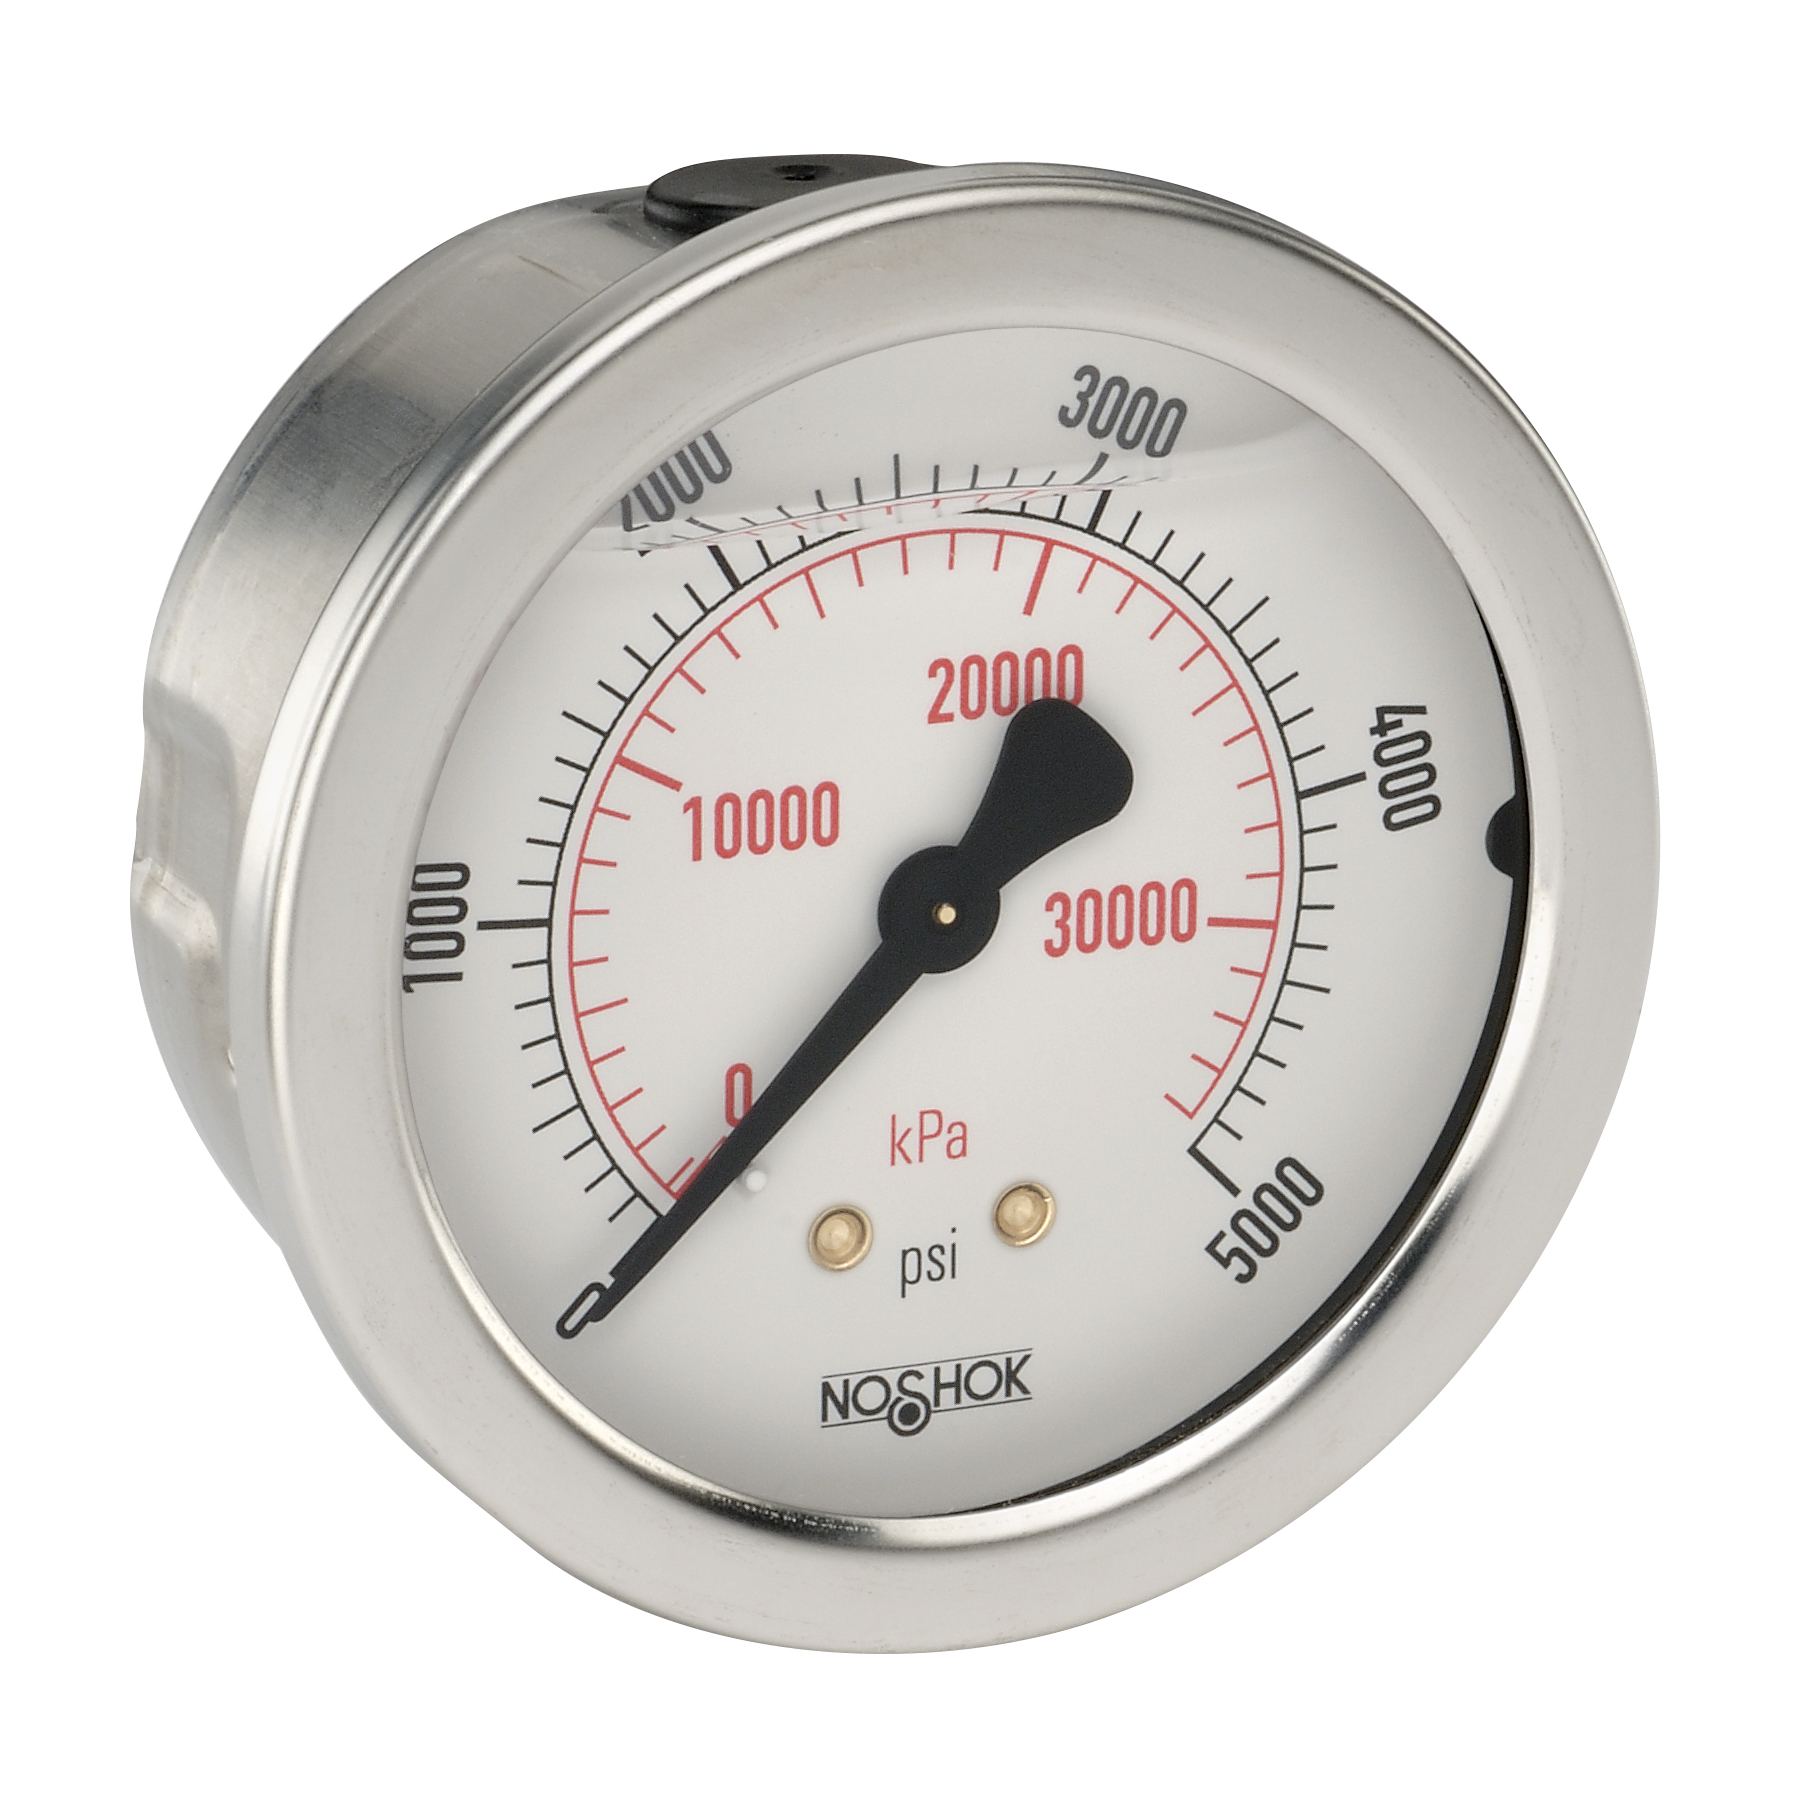 25-911-3000-psi/kPa-SG-SSFF 900 Series ABS and Stainless Steel Liquid Filled Pressure Gauges